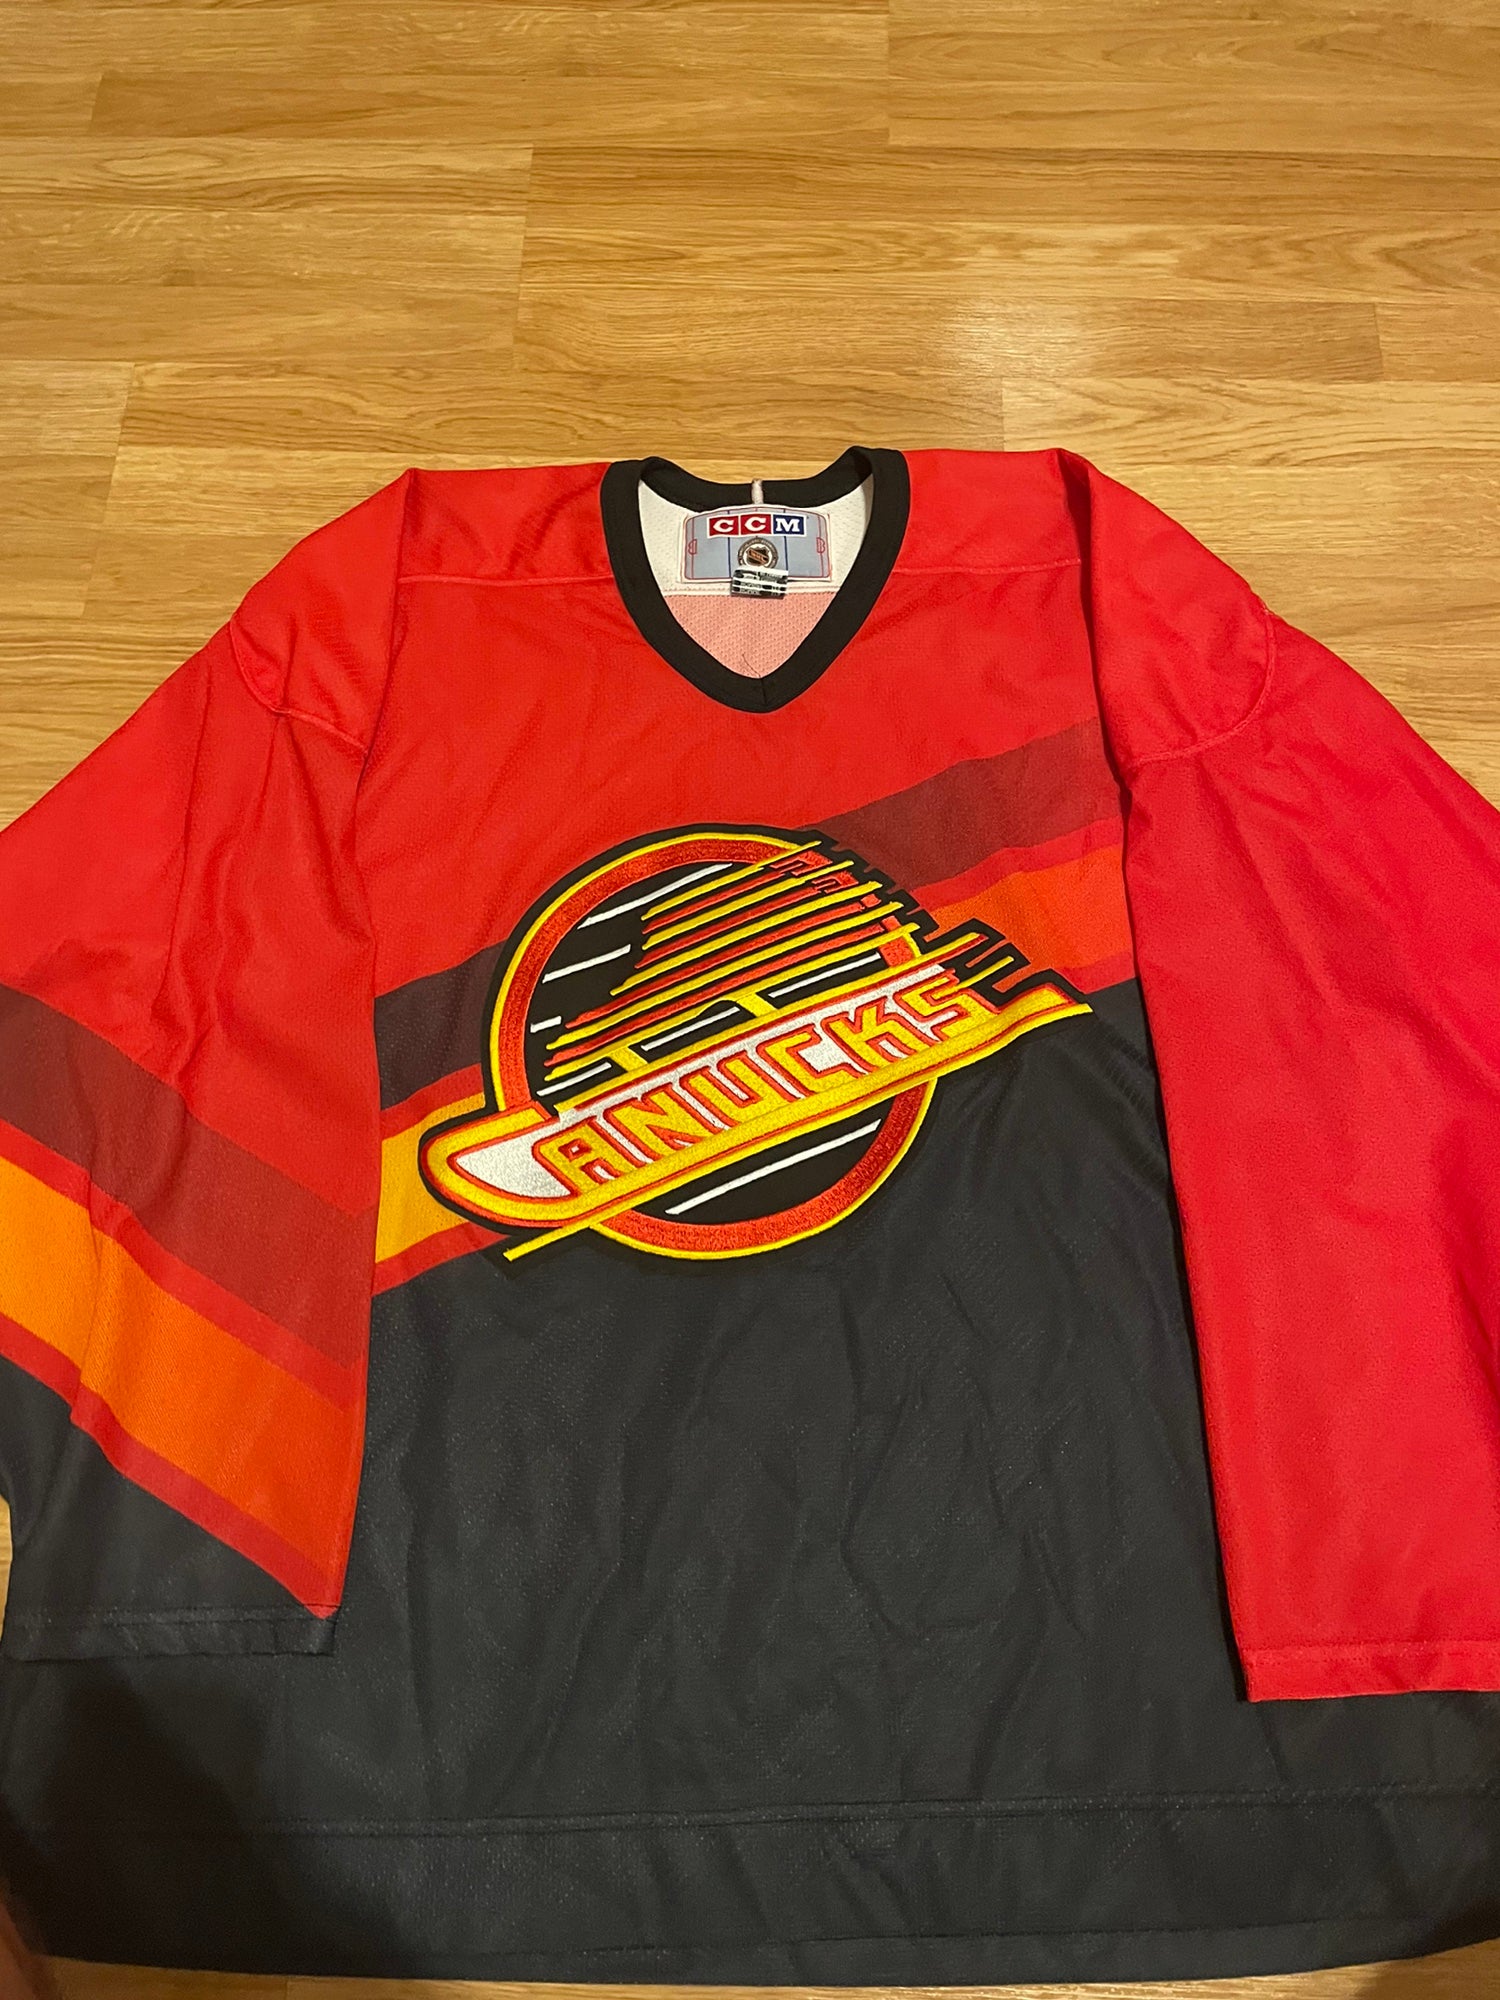 CCM Vancouver Canucks Gradient NHL Hockey Jersey Youth L/XL Canada Sewn  blank